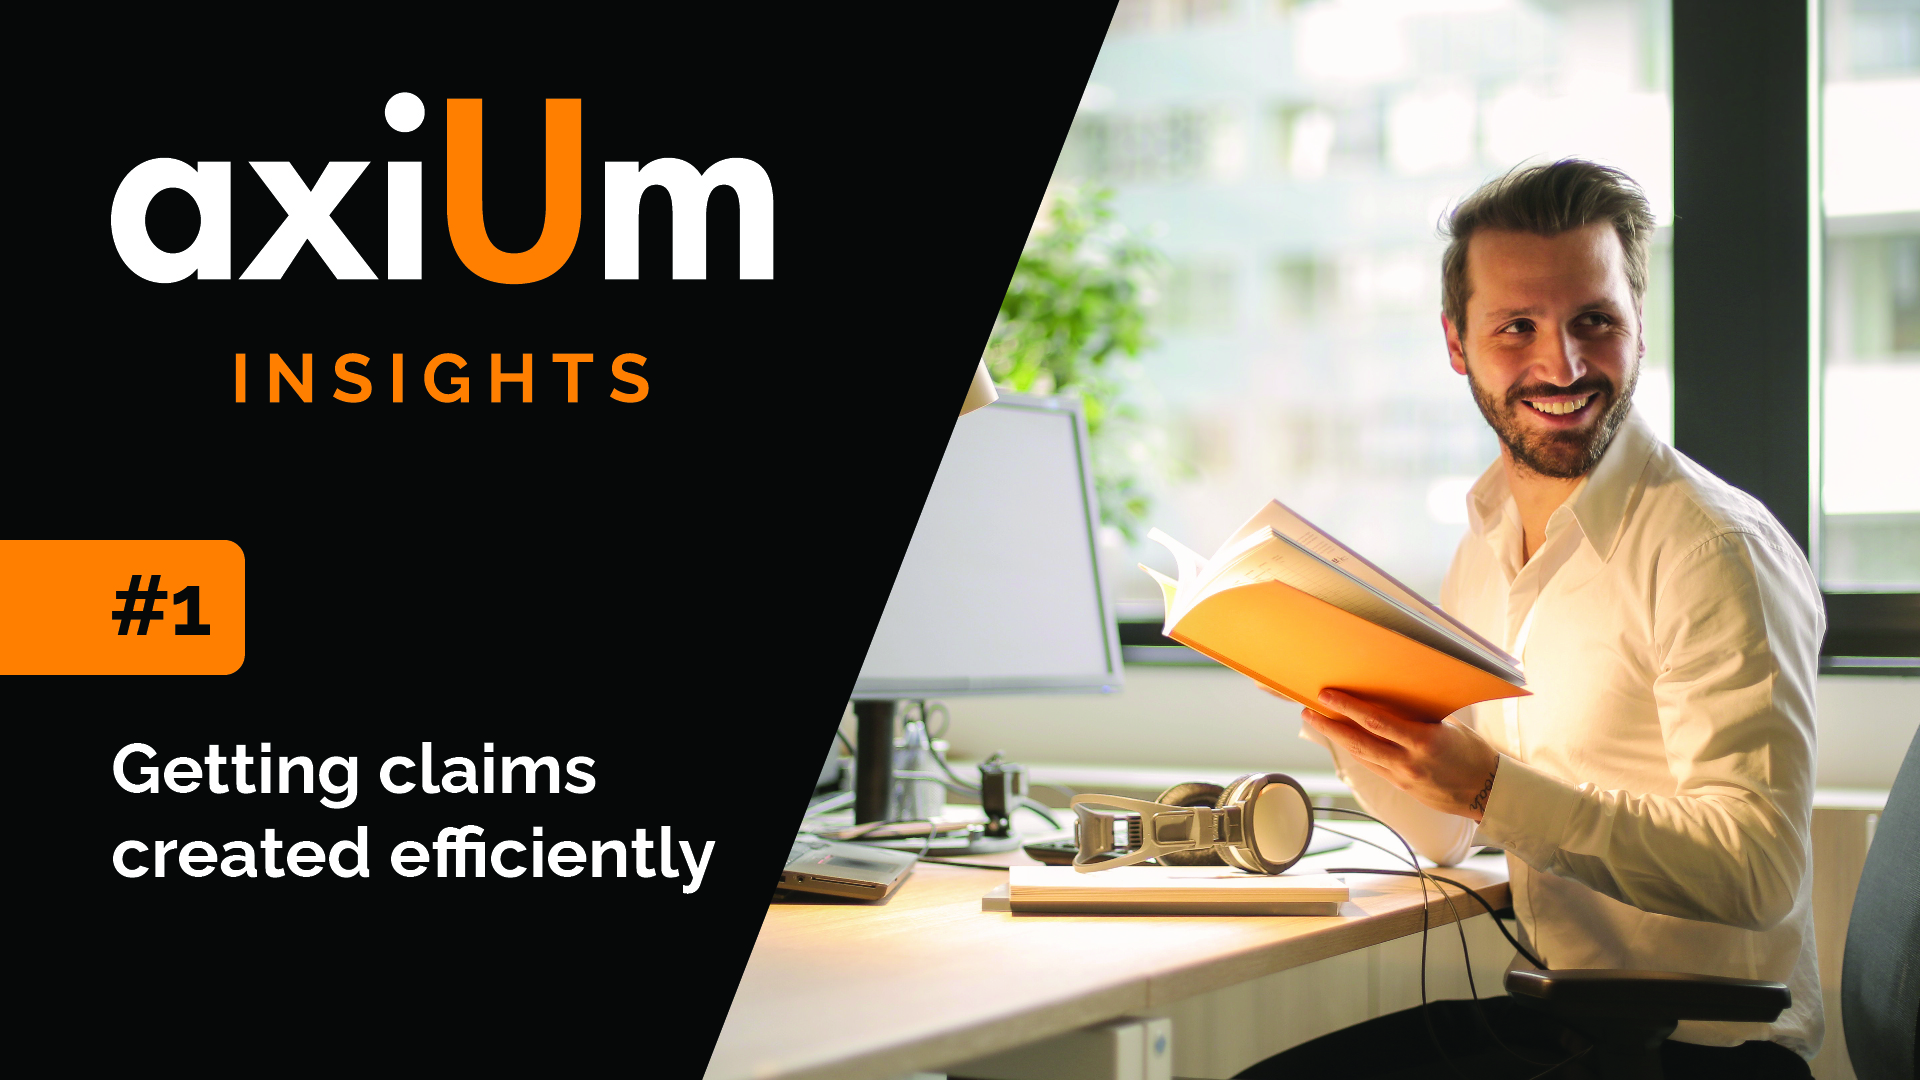 axiUm Insights: Getting claims created efficiently